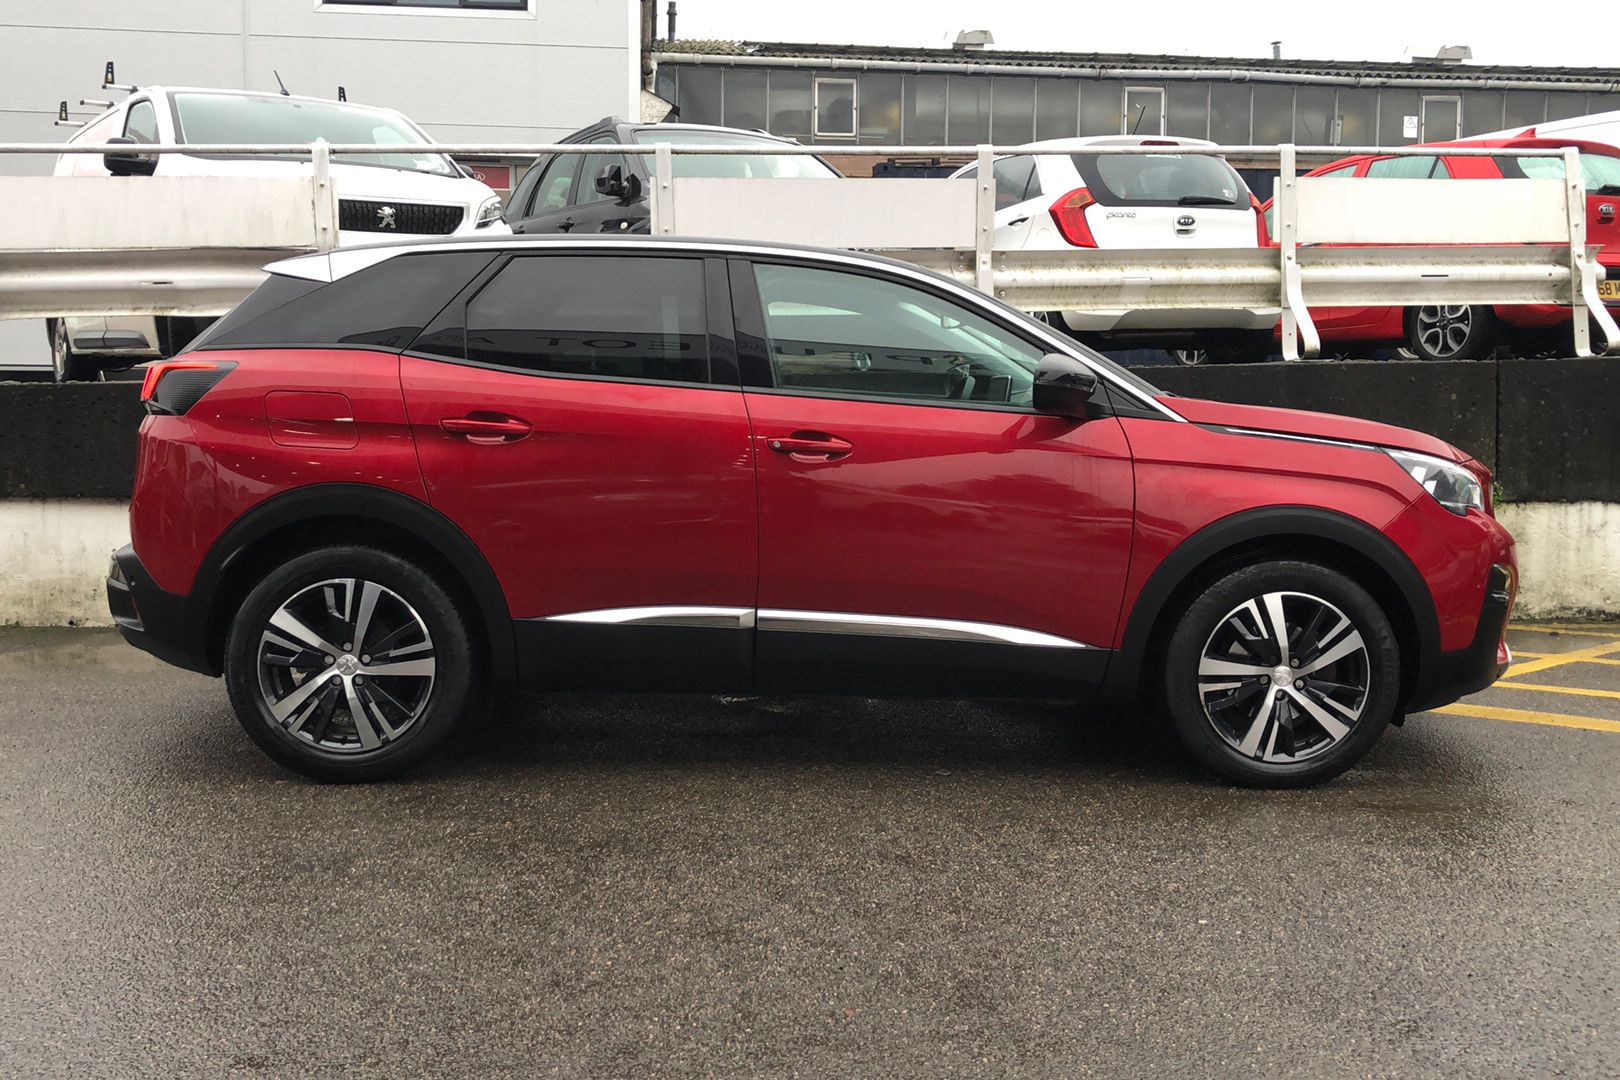 Used Peugeot 3008 1.2 Puretech S/S Allure 2017 for sale in Sidcup, Kent